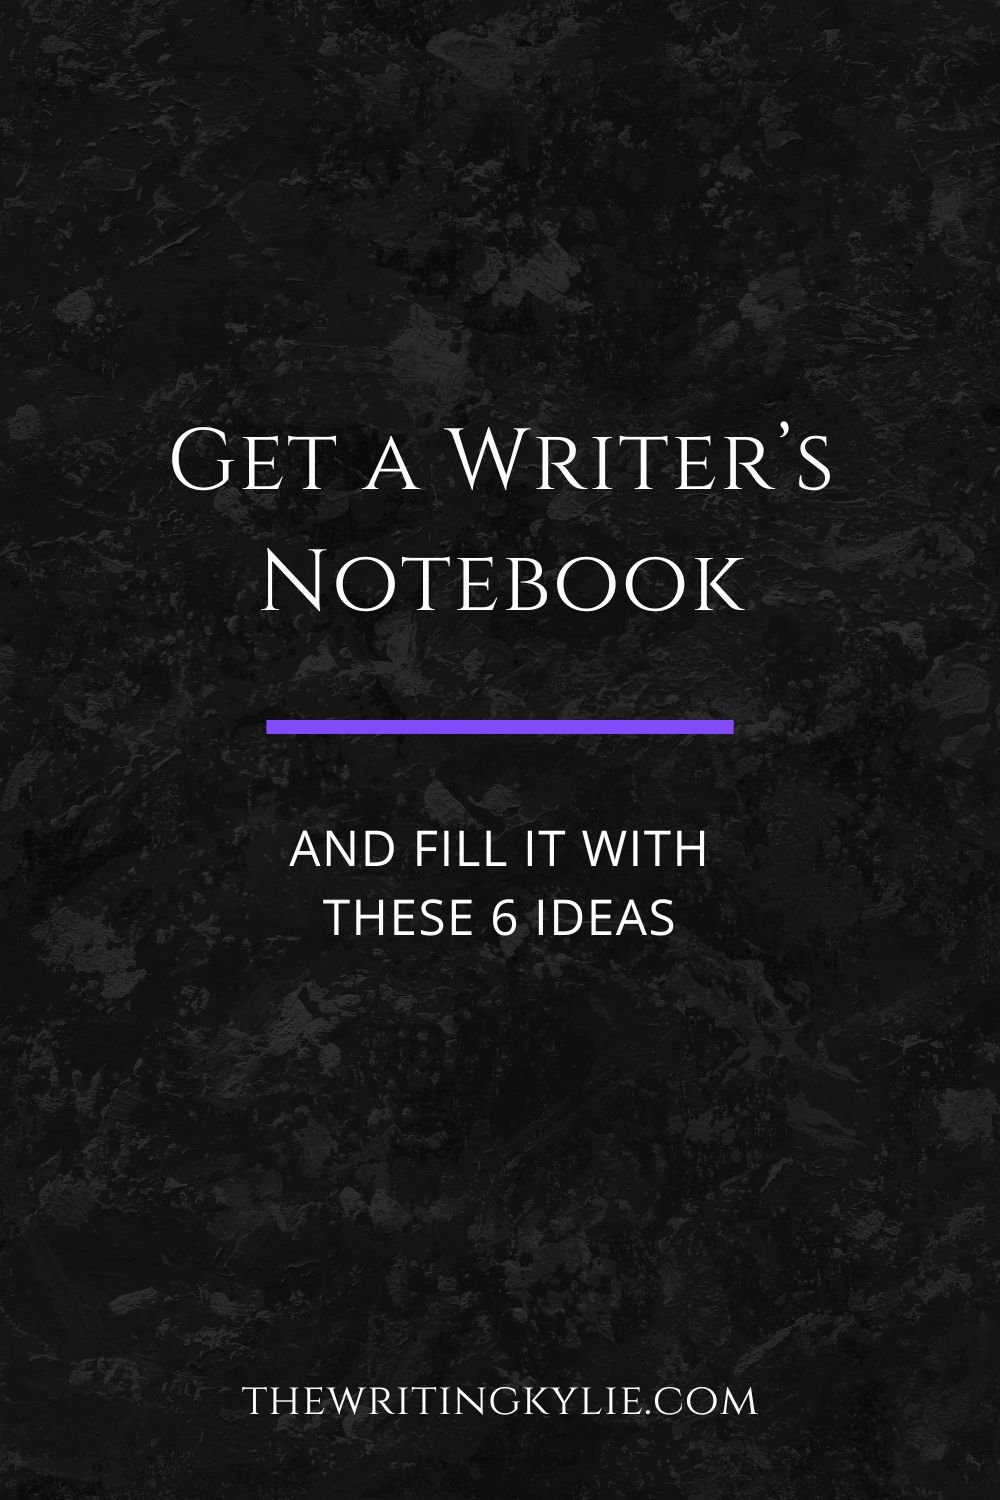 How to Use a Notebook to Write Your Novel